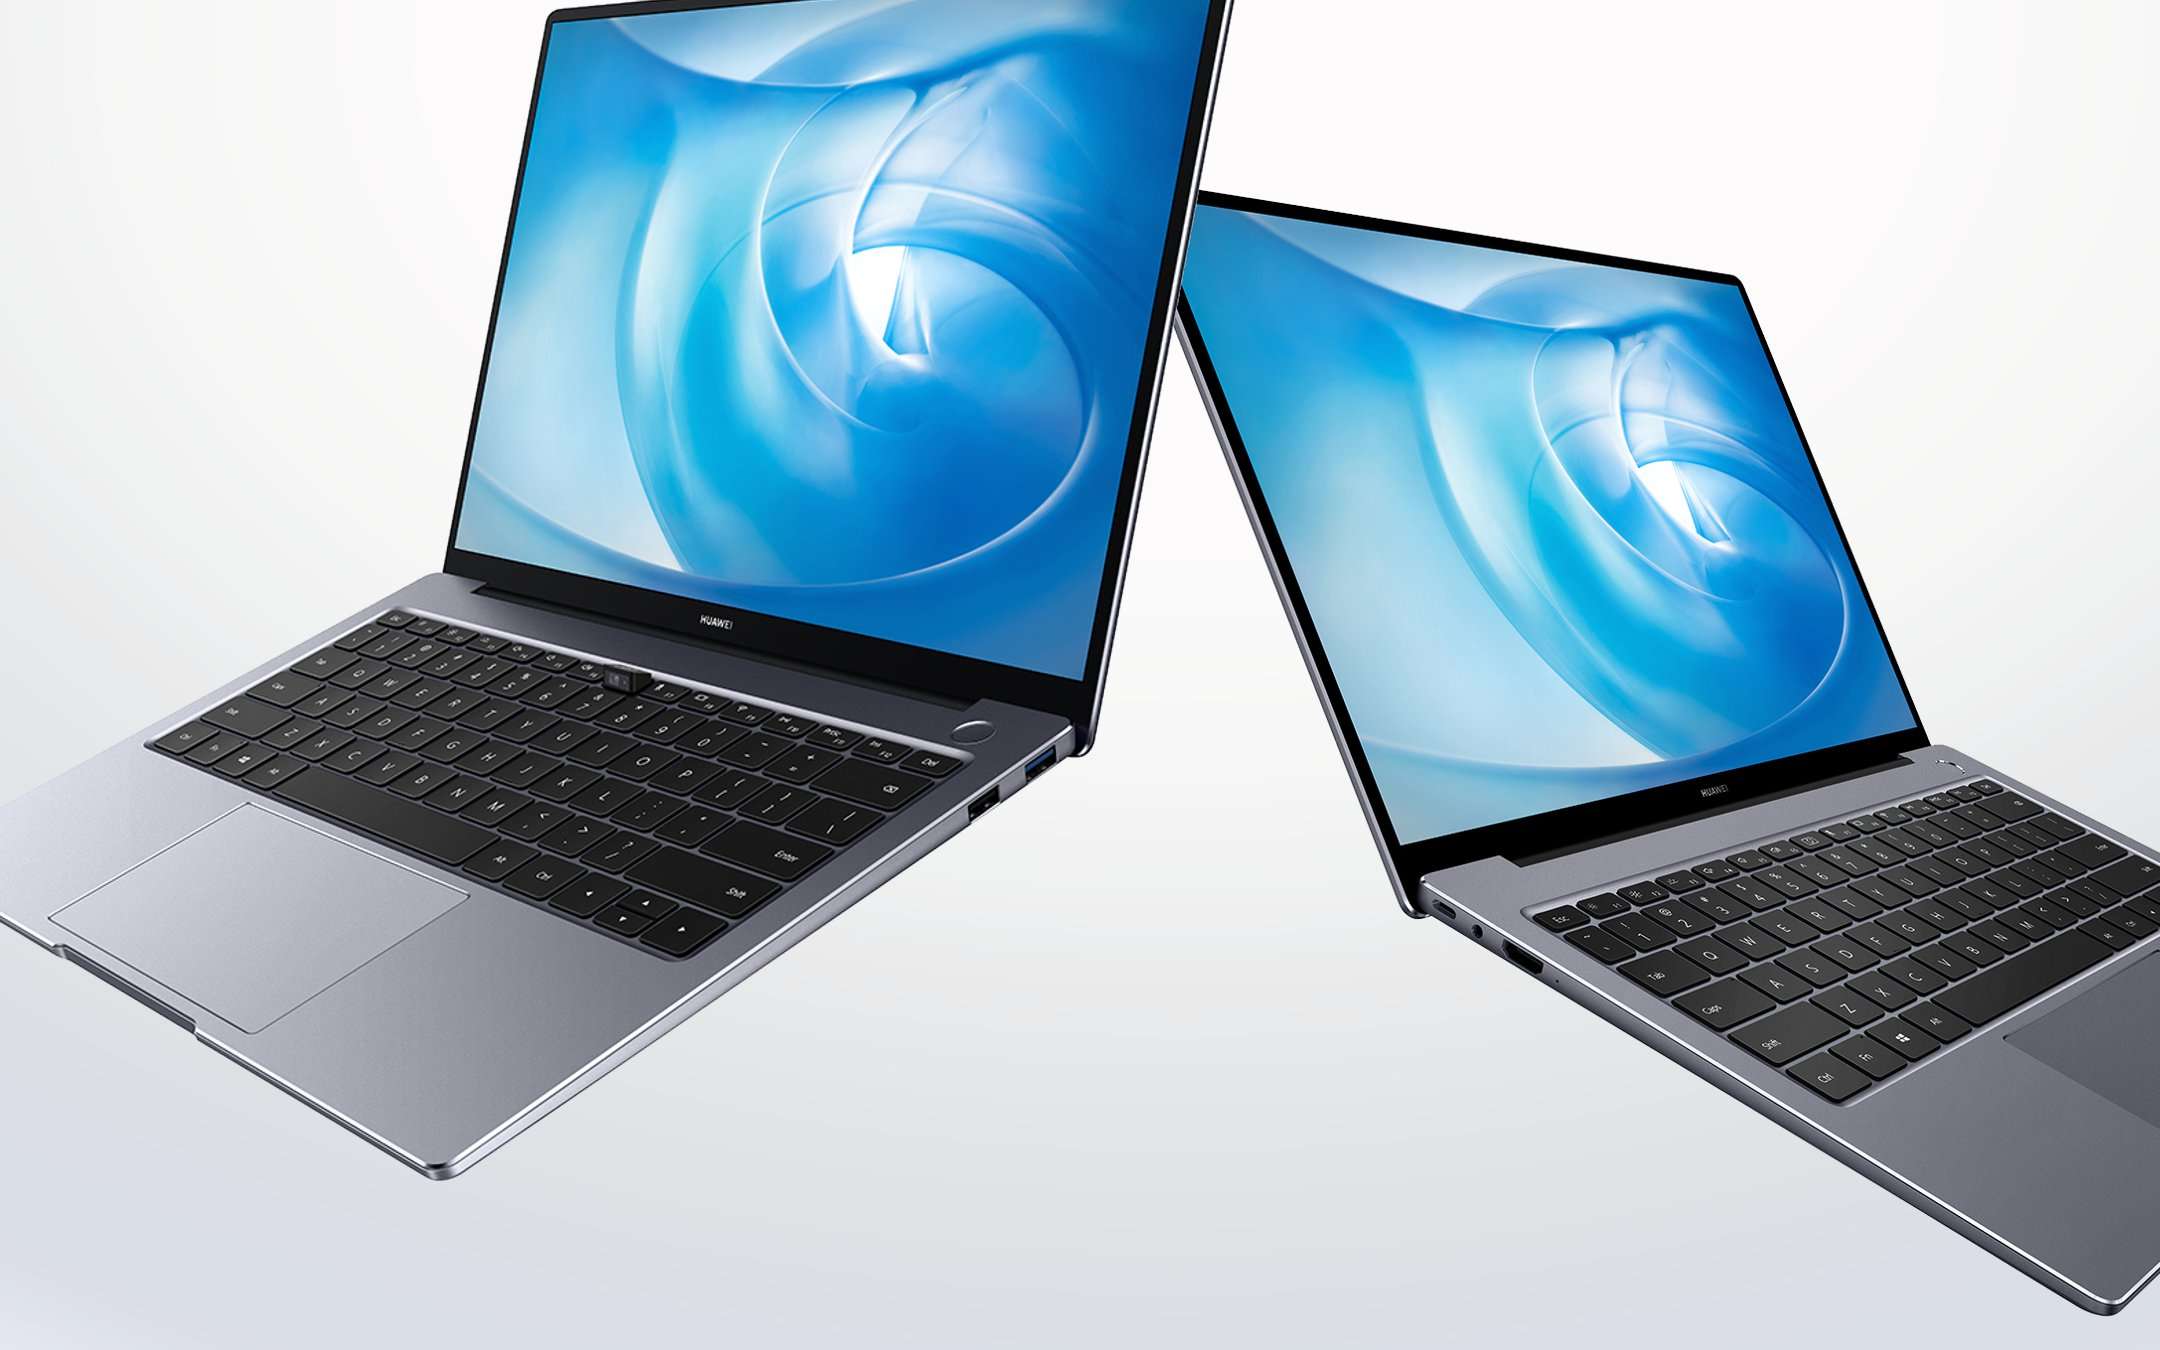 Huawei: here is the new Matebook X and Matebook 14